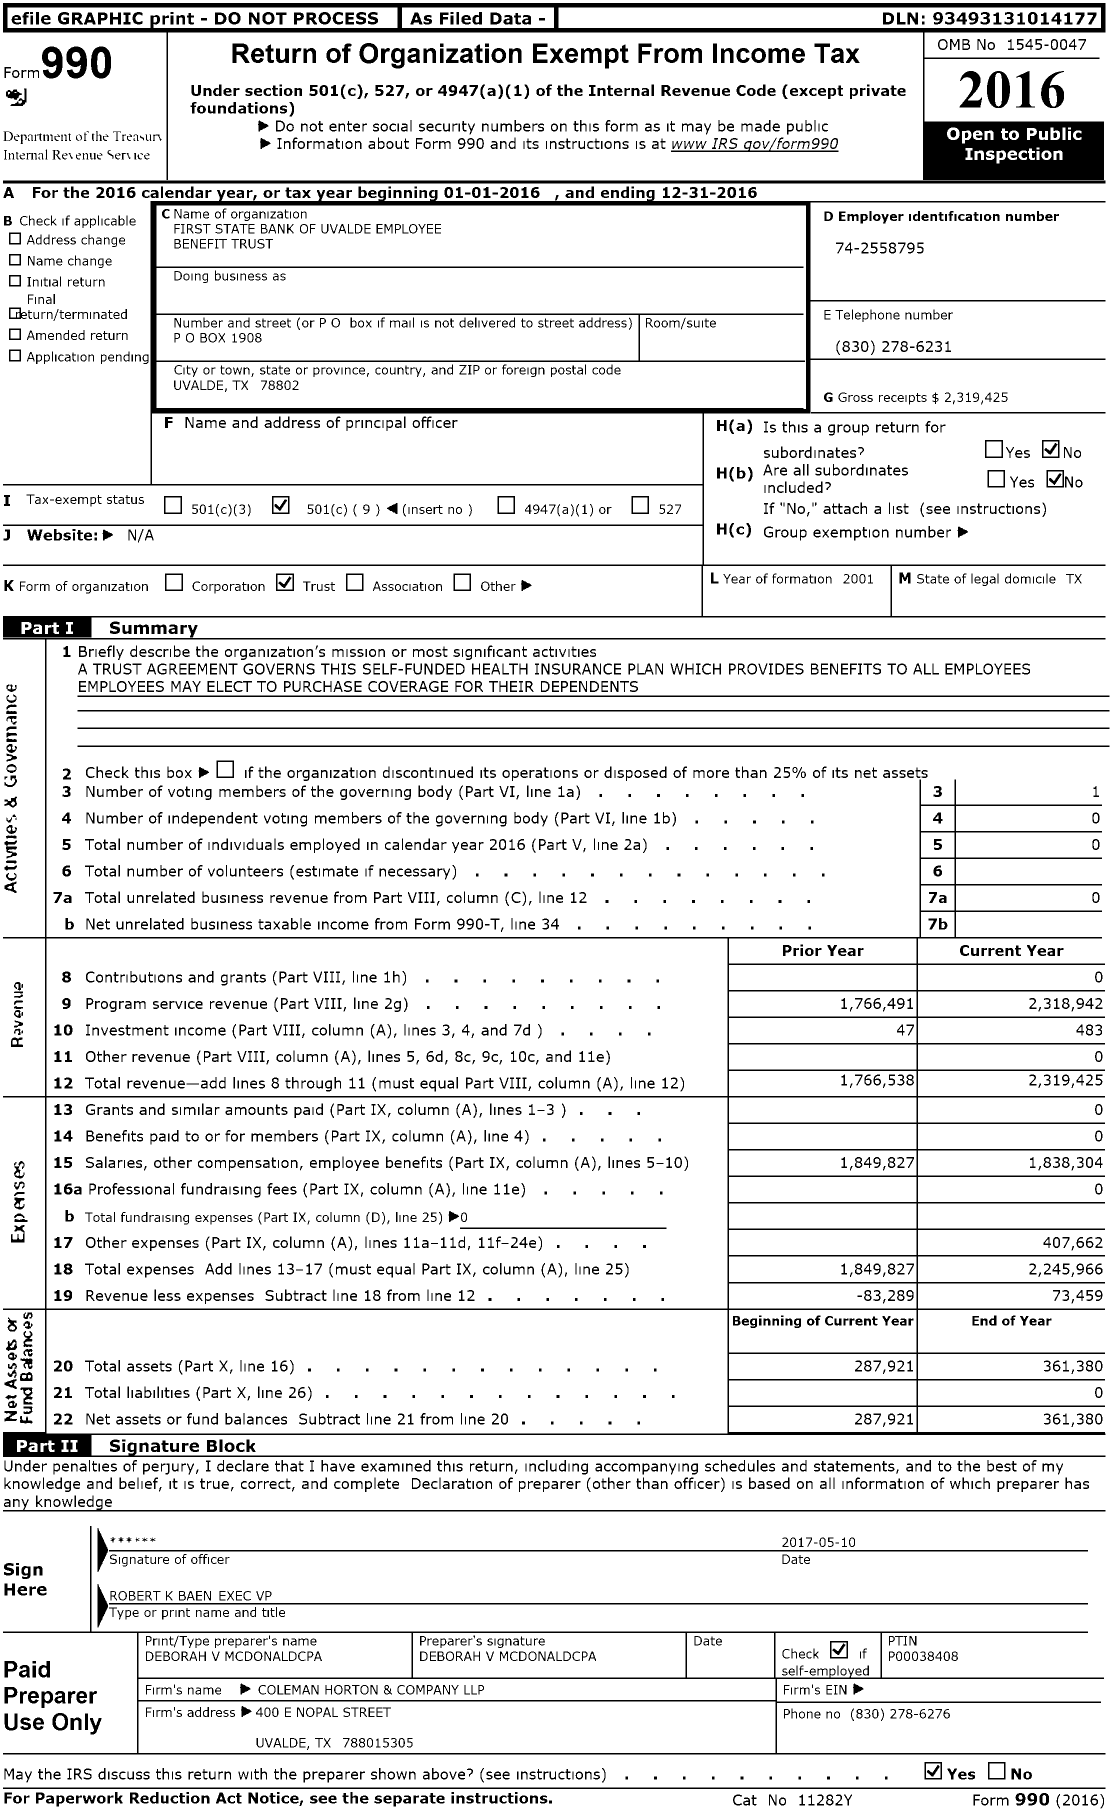 Image of first page of 2016 Form 990O for First State Bank of Uvalde Employee Benefit Trust